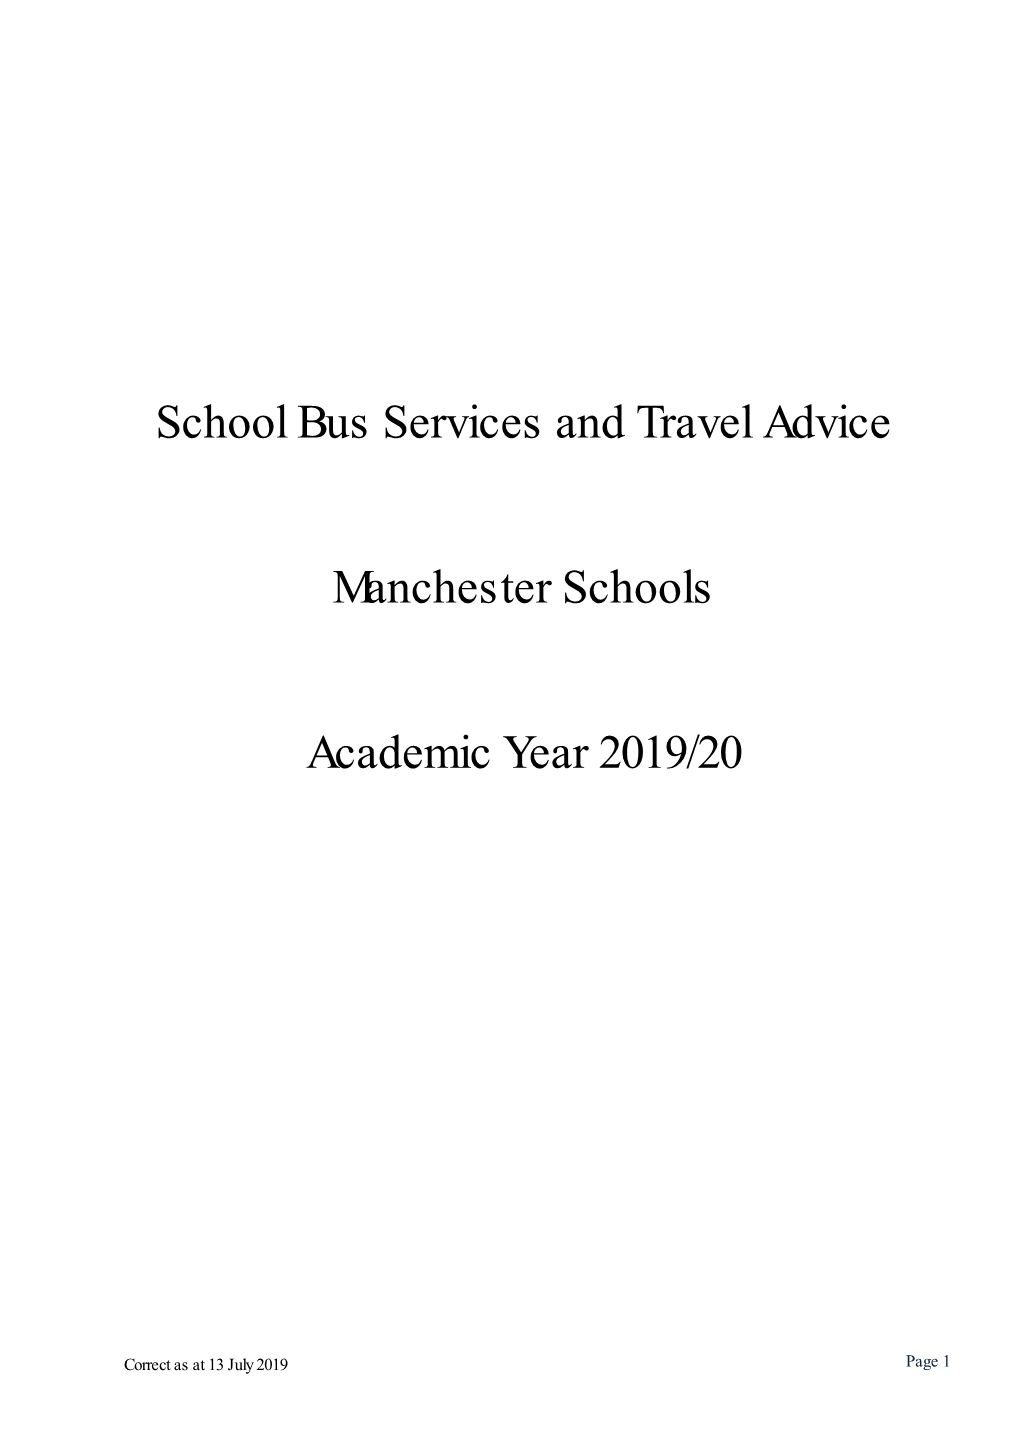 School Bus Services and Travel Advice Manchester Schools